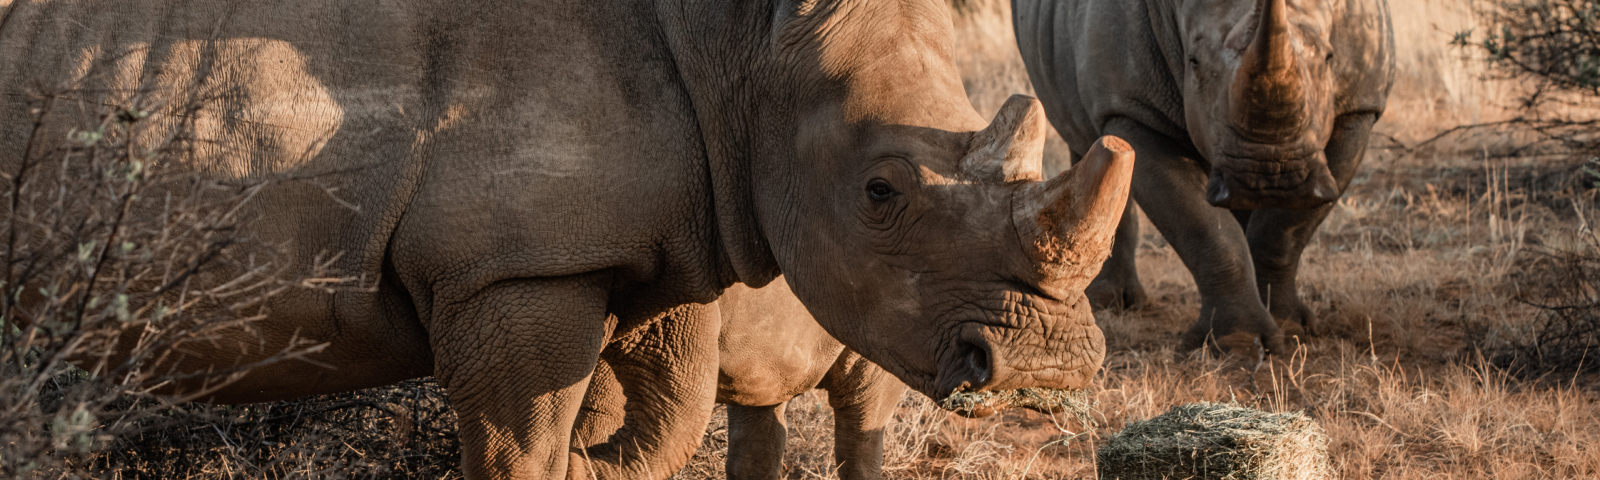 Preserving the white rhinos at Rhino Sanctuary Namibia: Together, we safeguard their future.